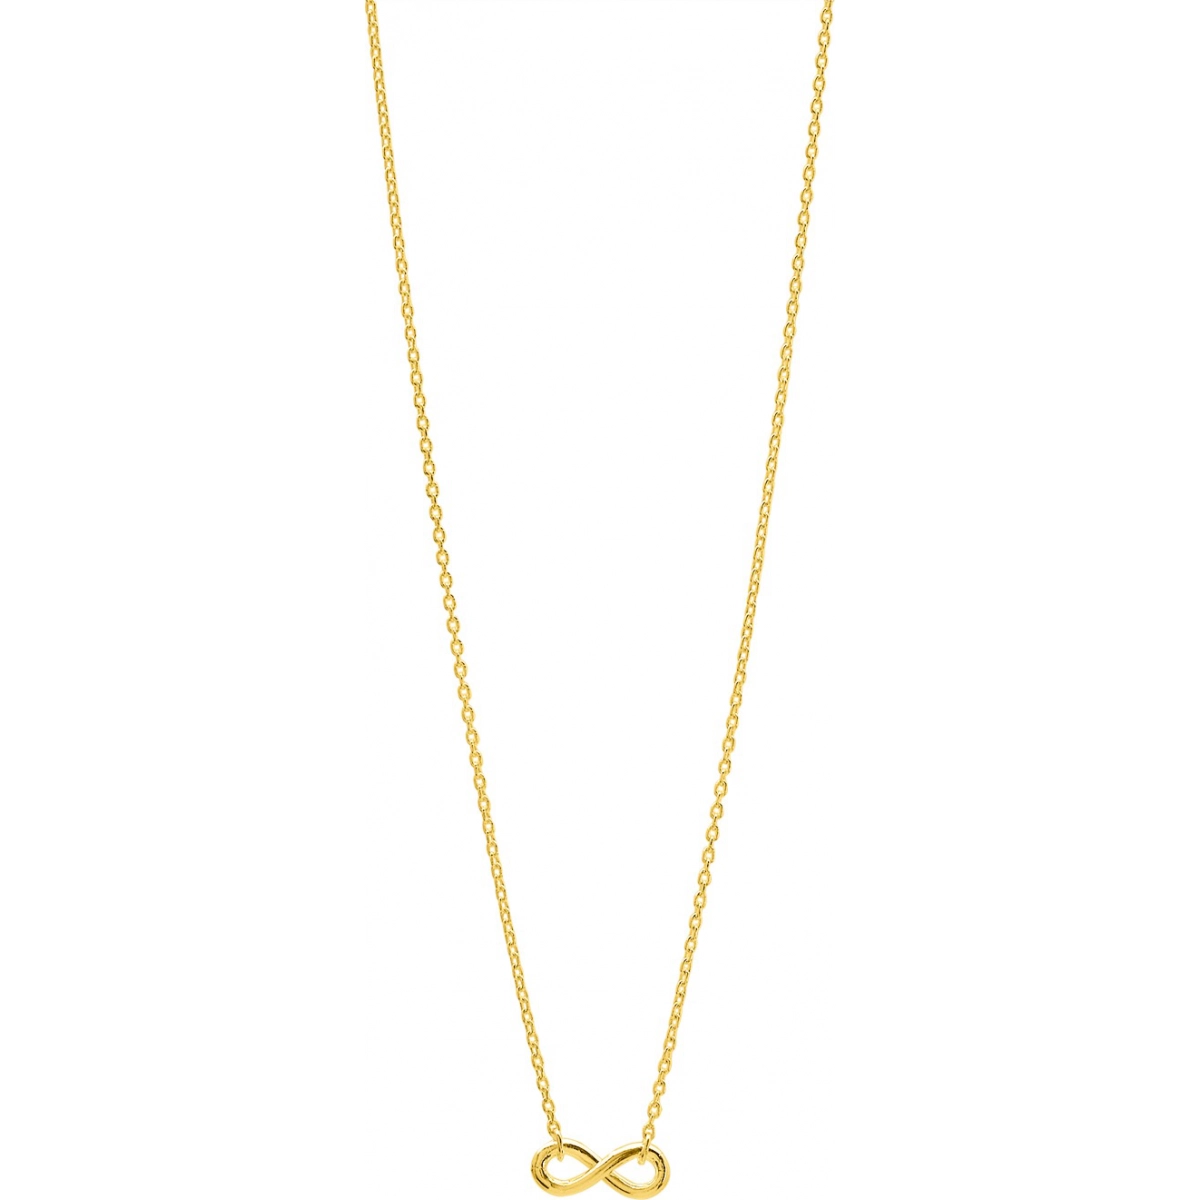 Collier plaqué or - Taille: 42  Lua Blanca  132114.42